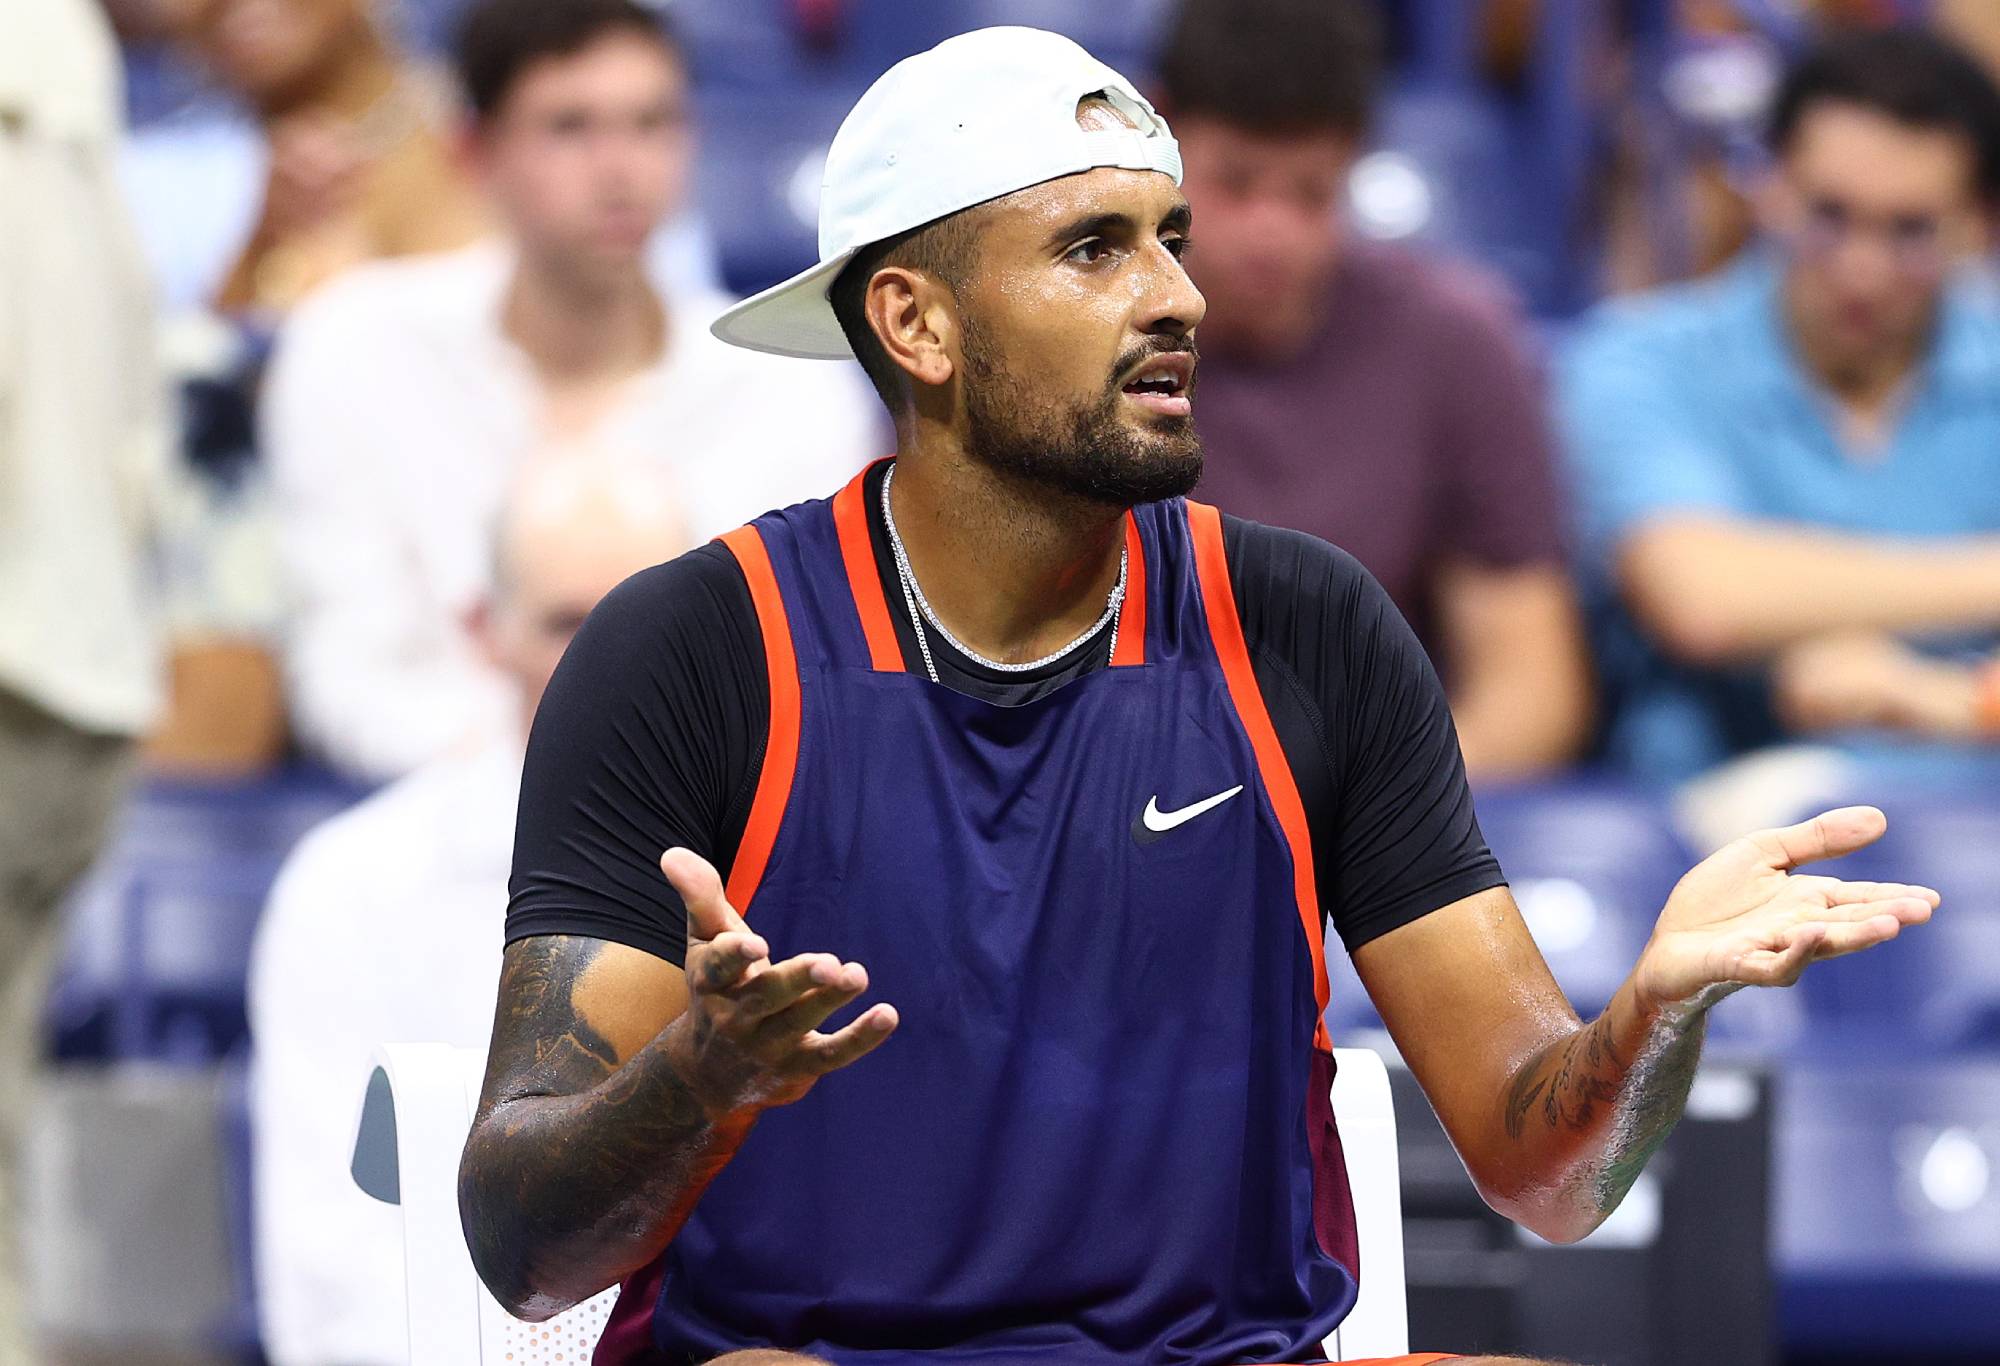 NEW YORK, NEW YORK - AUGUST 29: Nick Kyrgios of Australia reacts after winning the first set against Thanasi Kokkinakis of Australia during the Men's Singles First Round on Day One of the 2022 US Open at USTA Billie Jean King National Tennis Center on August 29, 2022 in the Flushing neighborhood of the Queens borough of New York City. (Photo by Elsa/Getty Images)